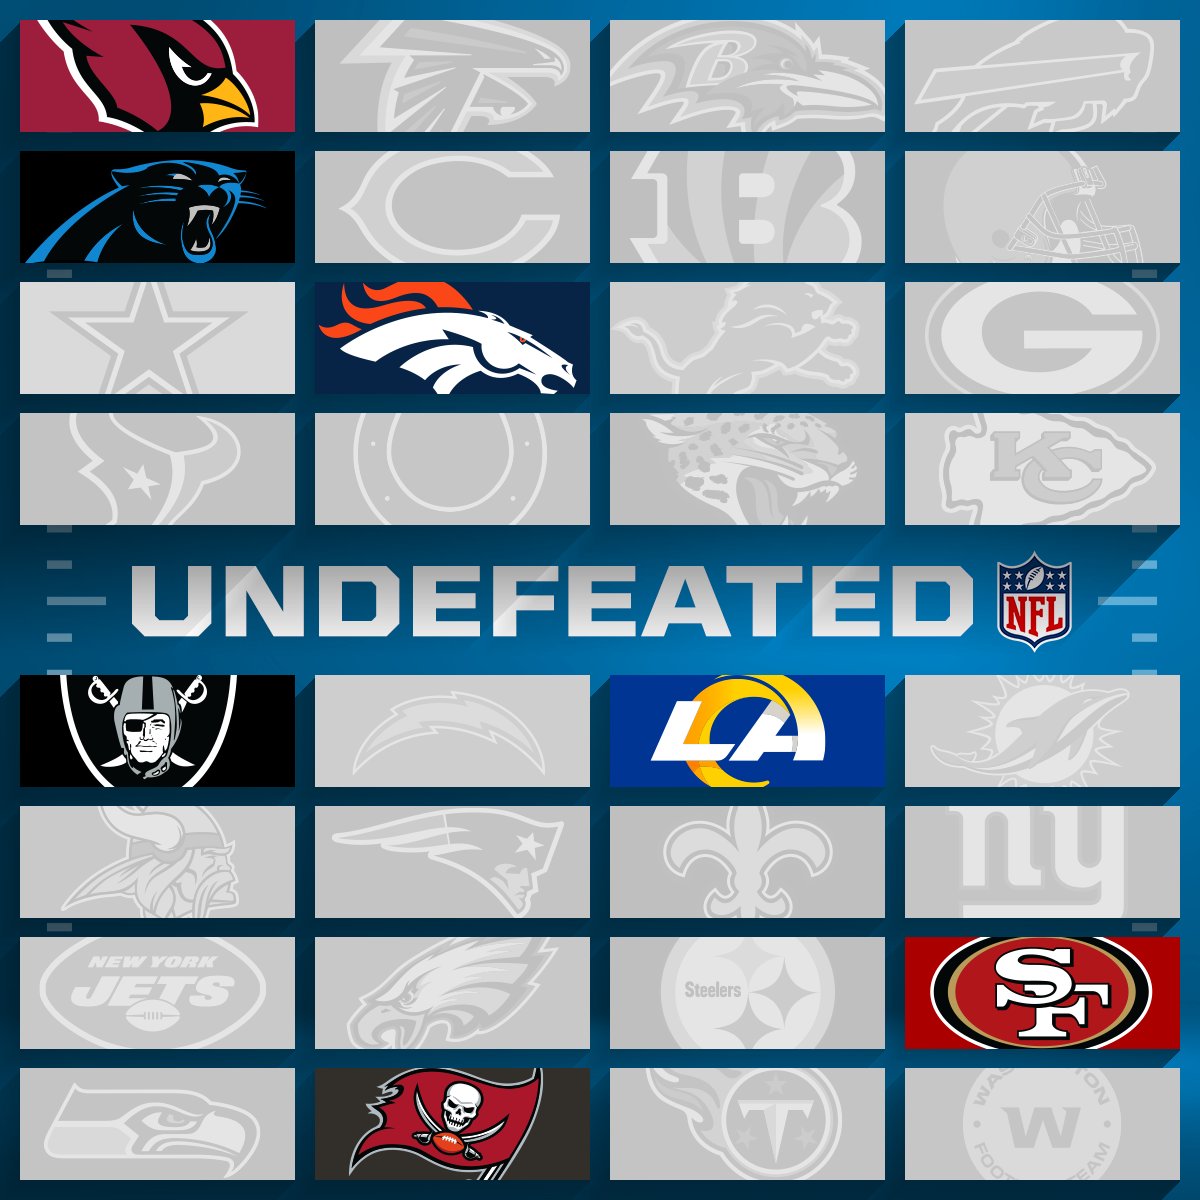 undefeated nfl teams today